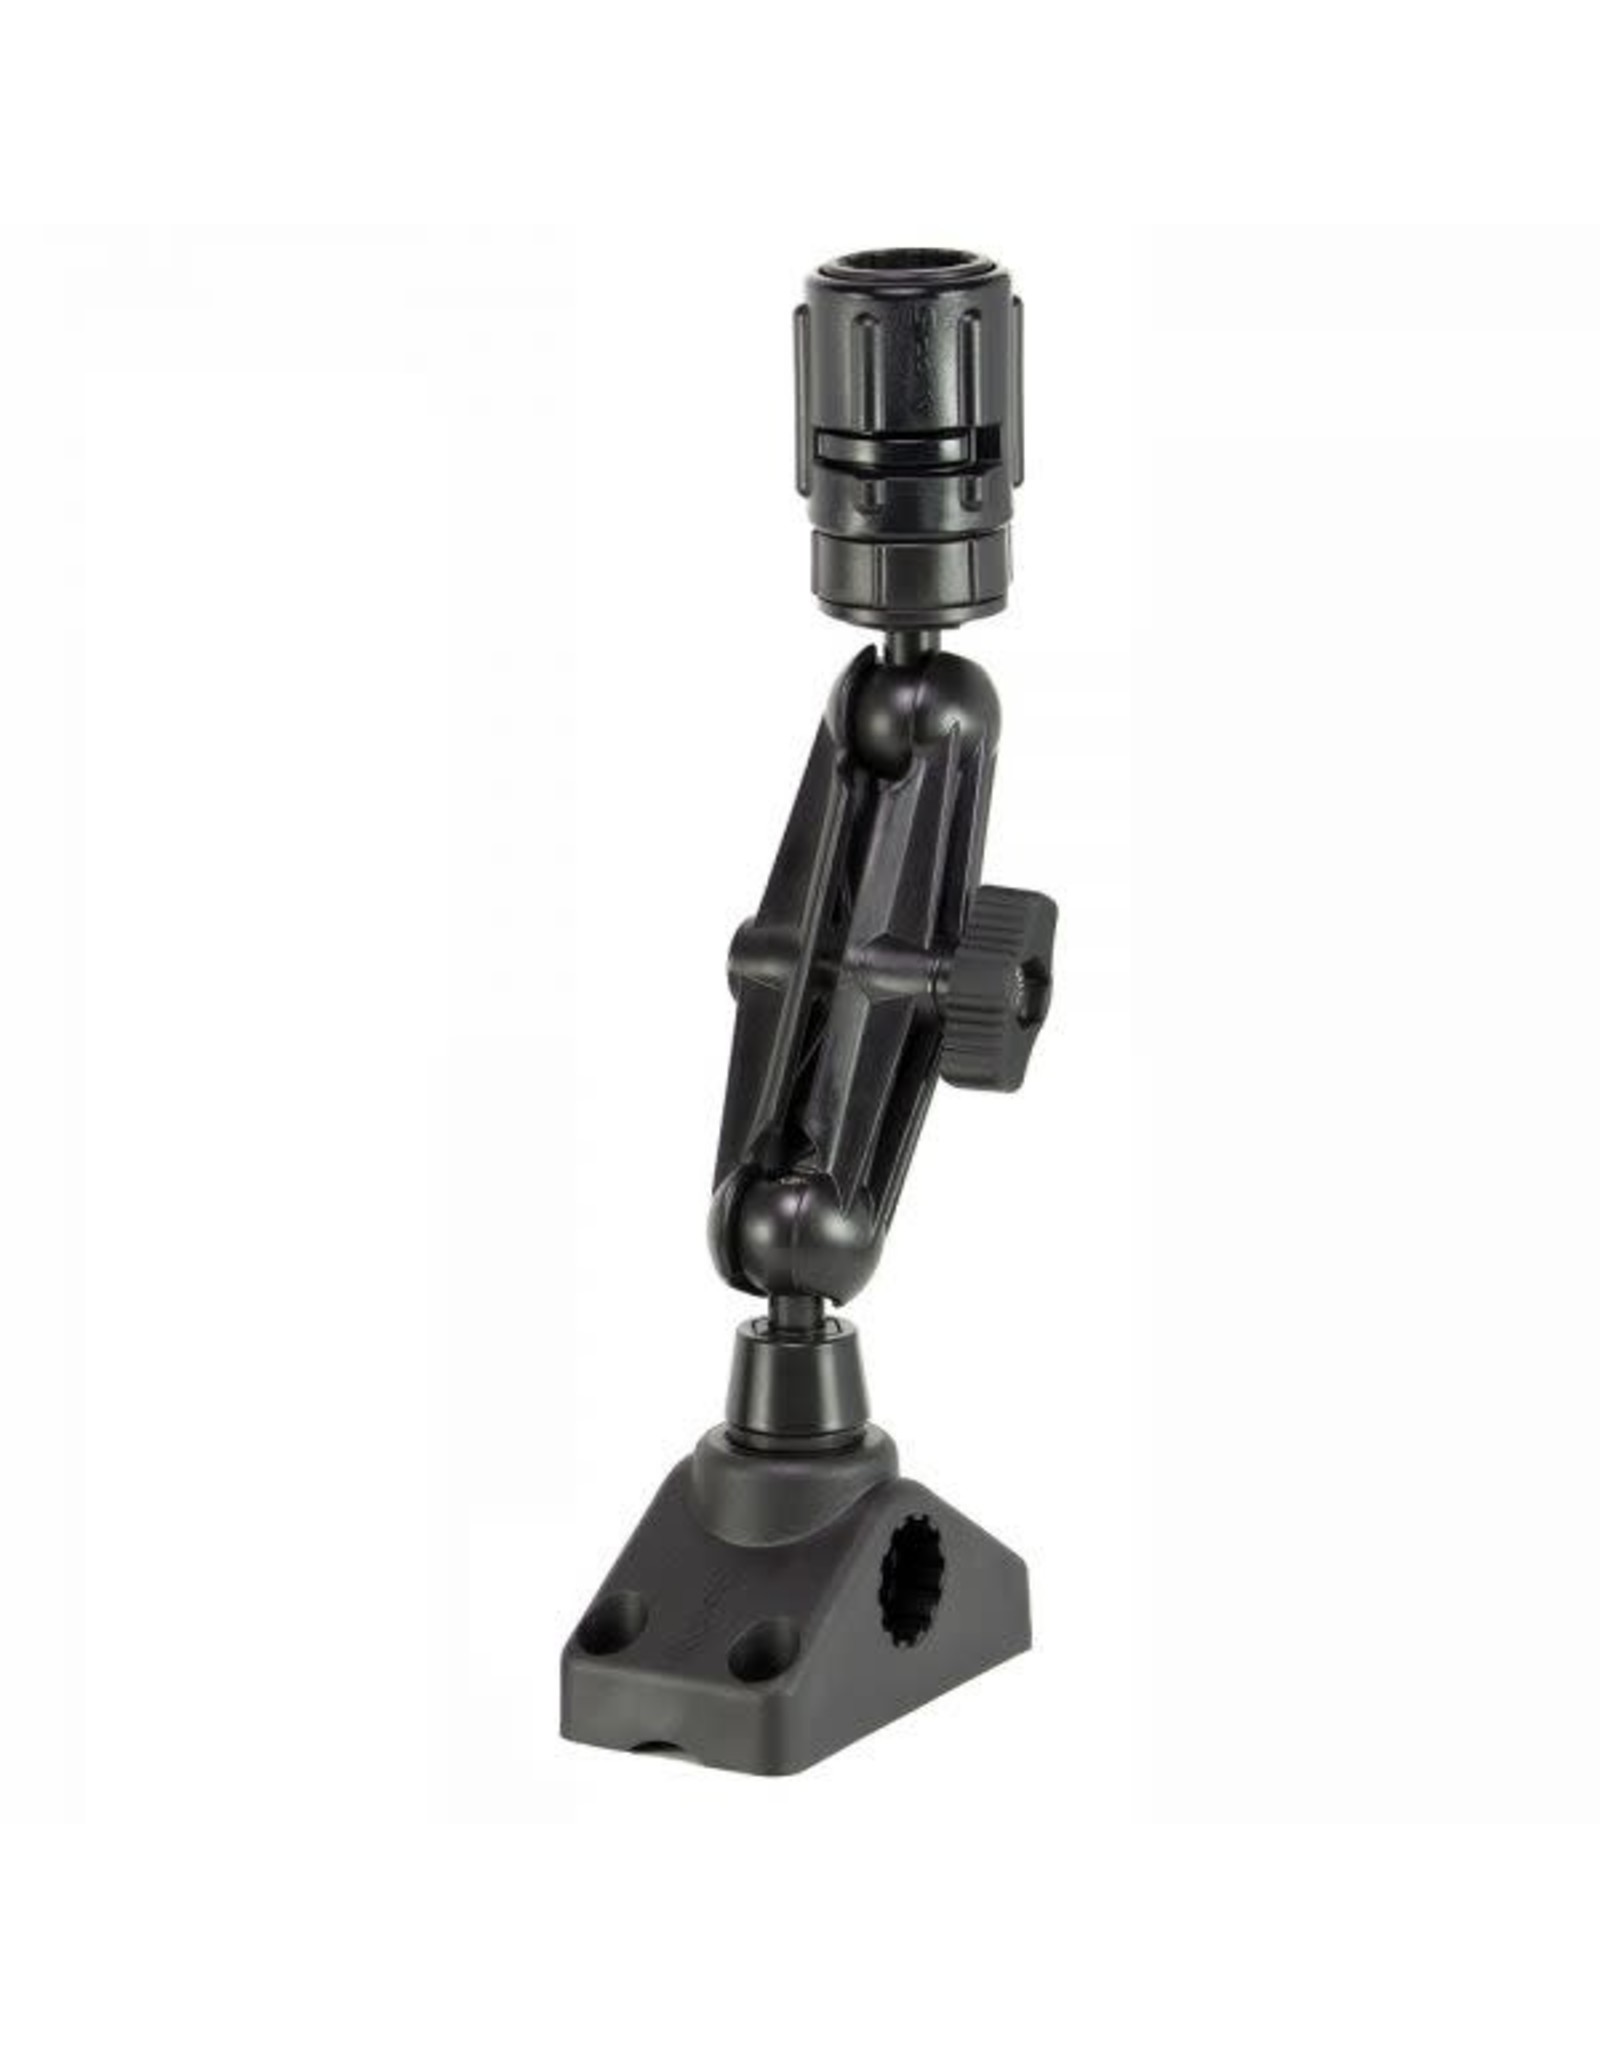 Scotty Scotty 152 Système à Boule avec Support 241 et Tête 438 - Ball Mounting System With  241 and 438